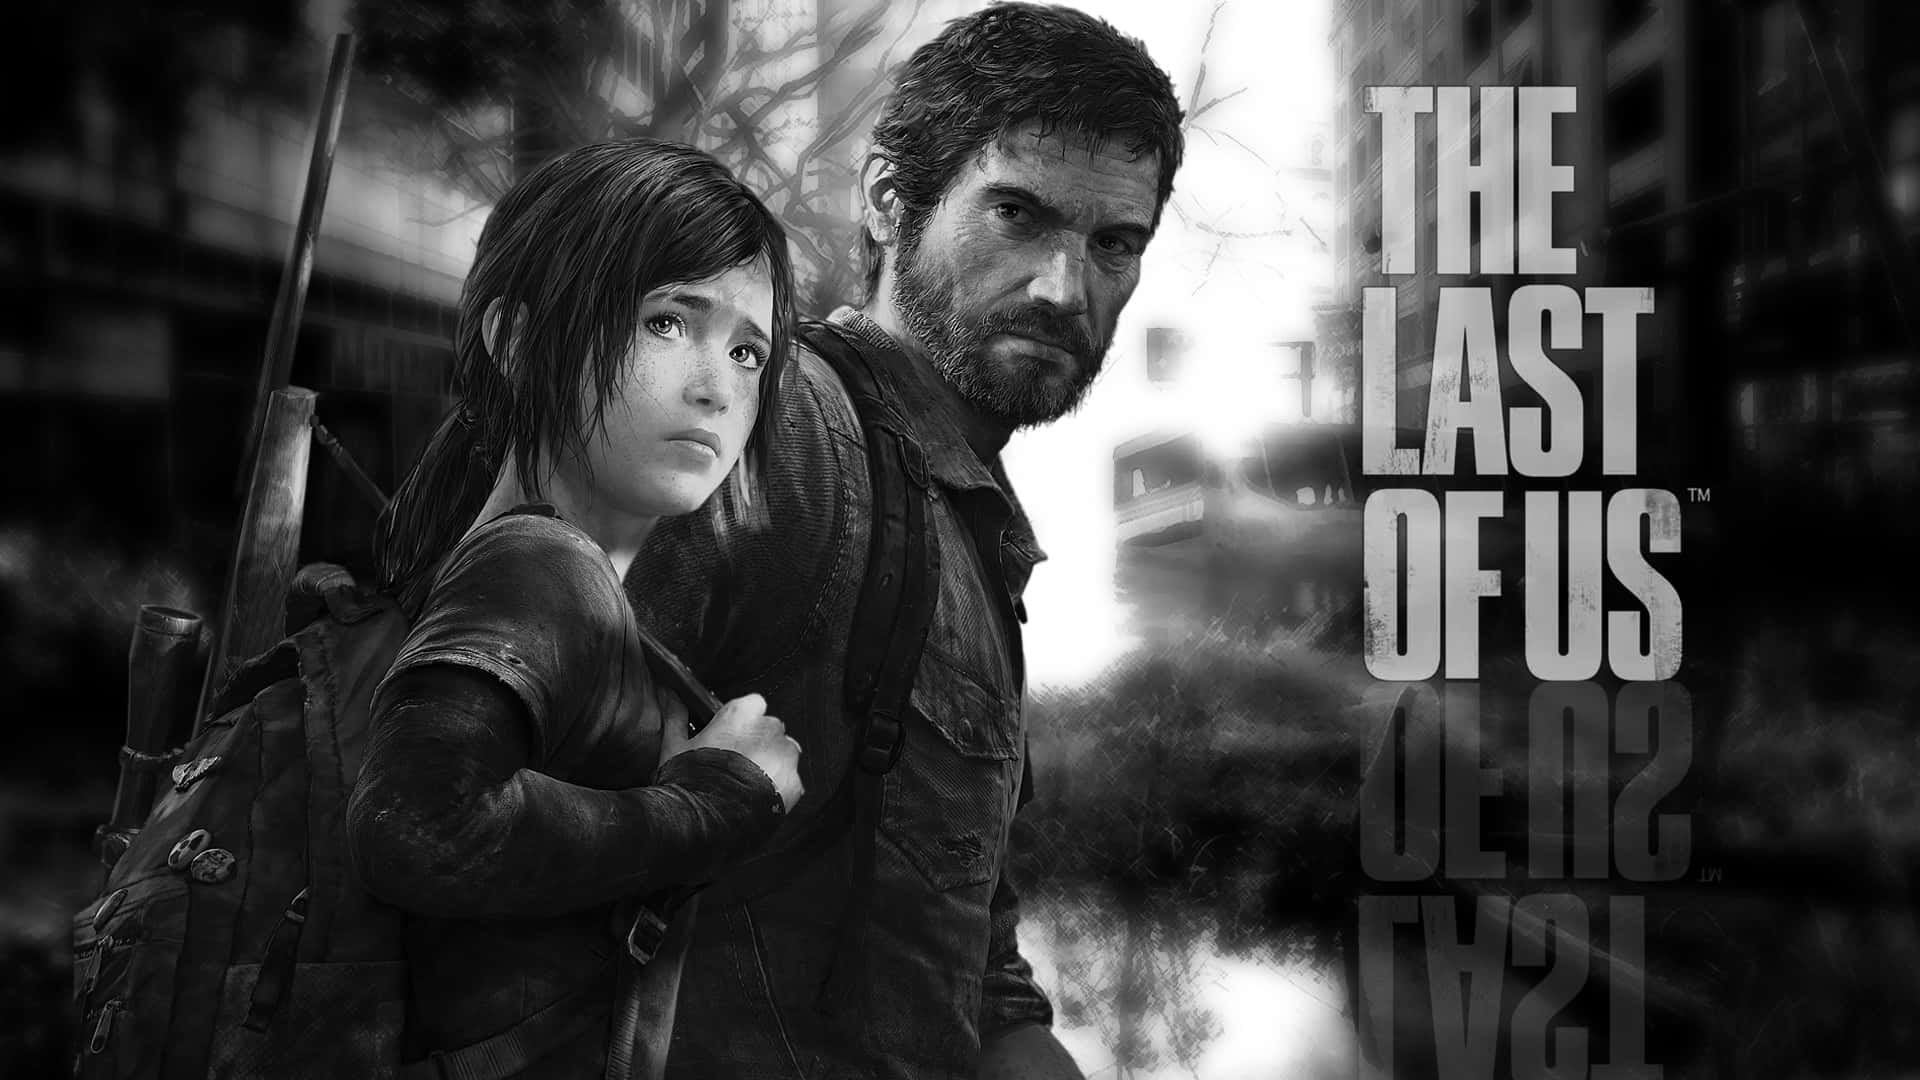 Ellie The Last Of Us iPhone Wallpapers - Wallpaper Cave